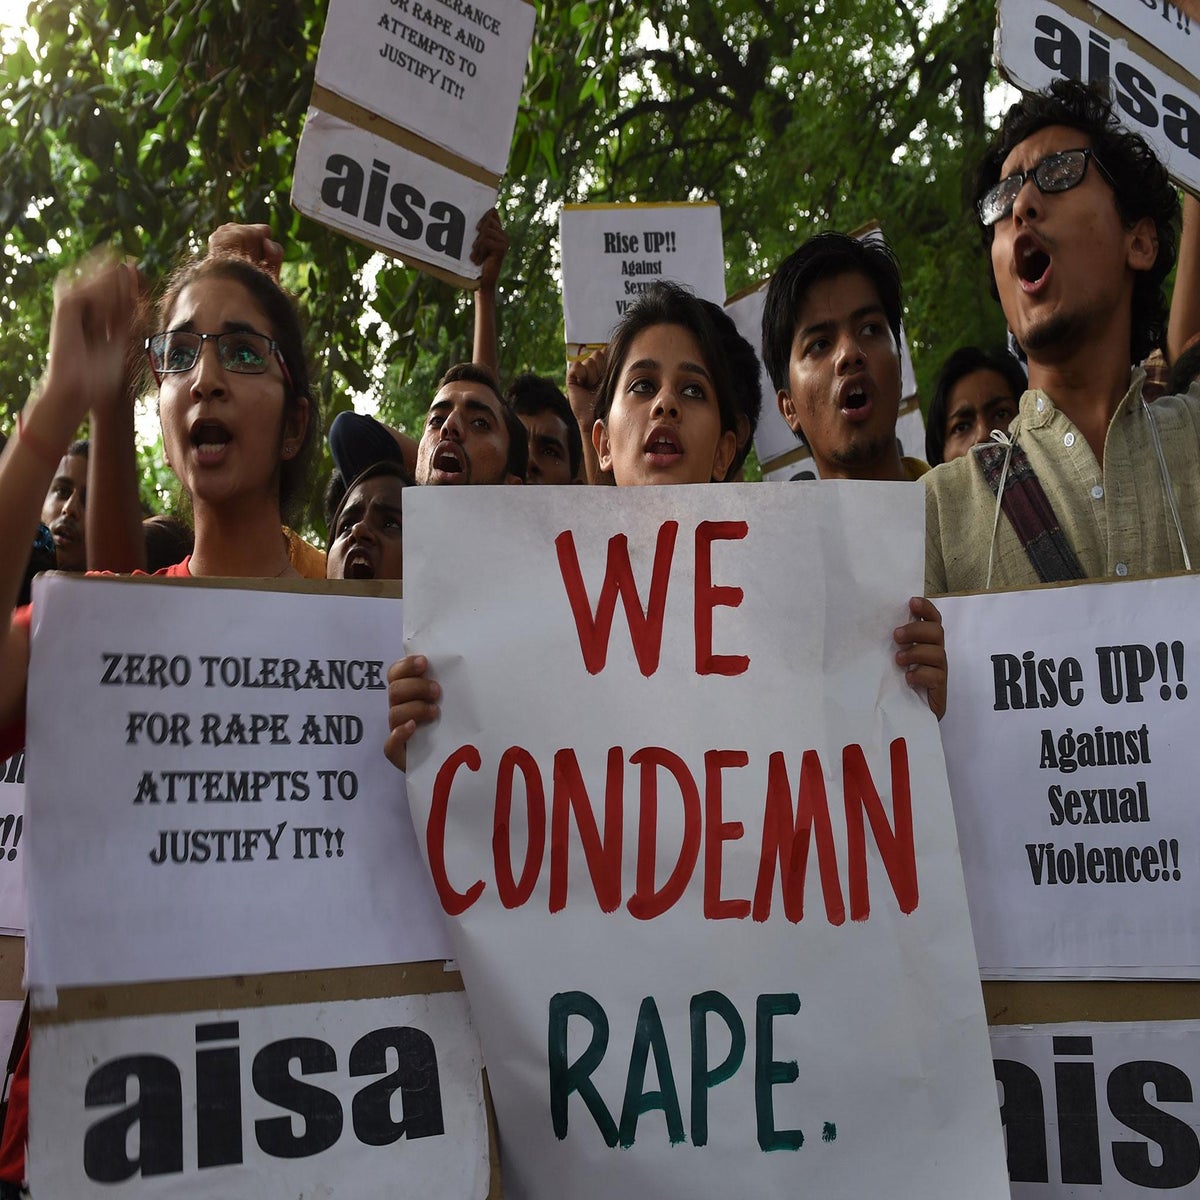 Xx Video Jabardasti Rape Rally - Gang rape' of student prompts arrests after video causes outcry in India |  The Independent | The Independent